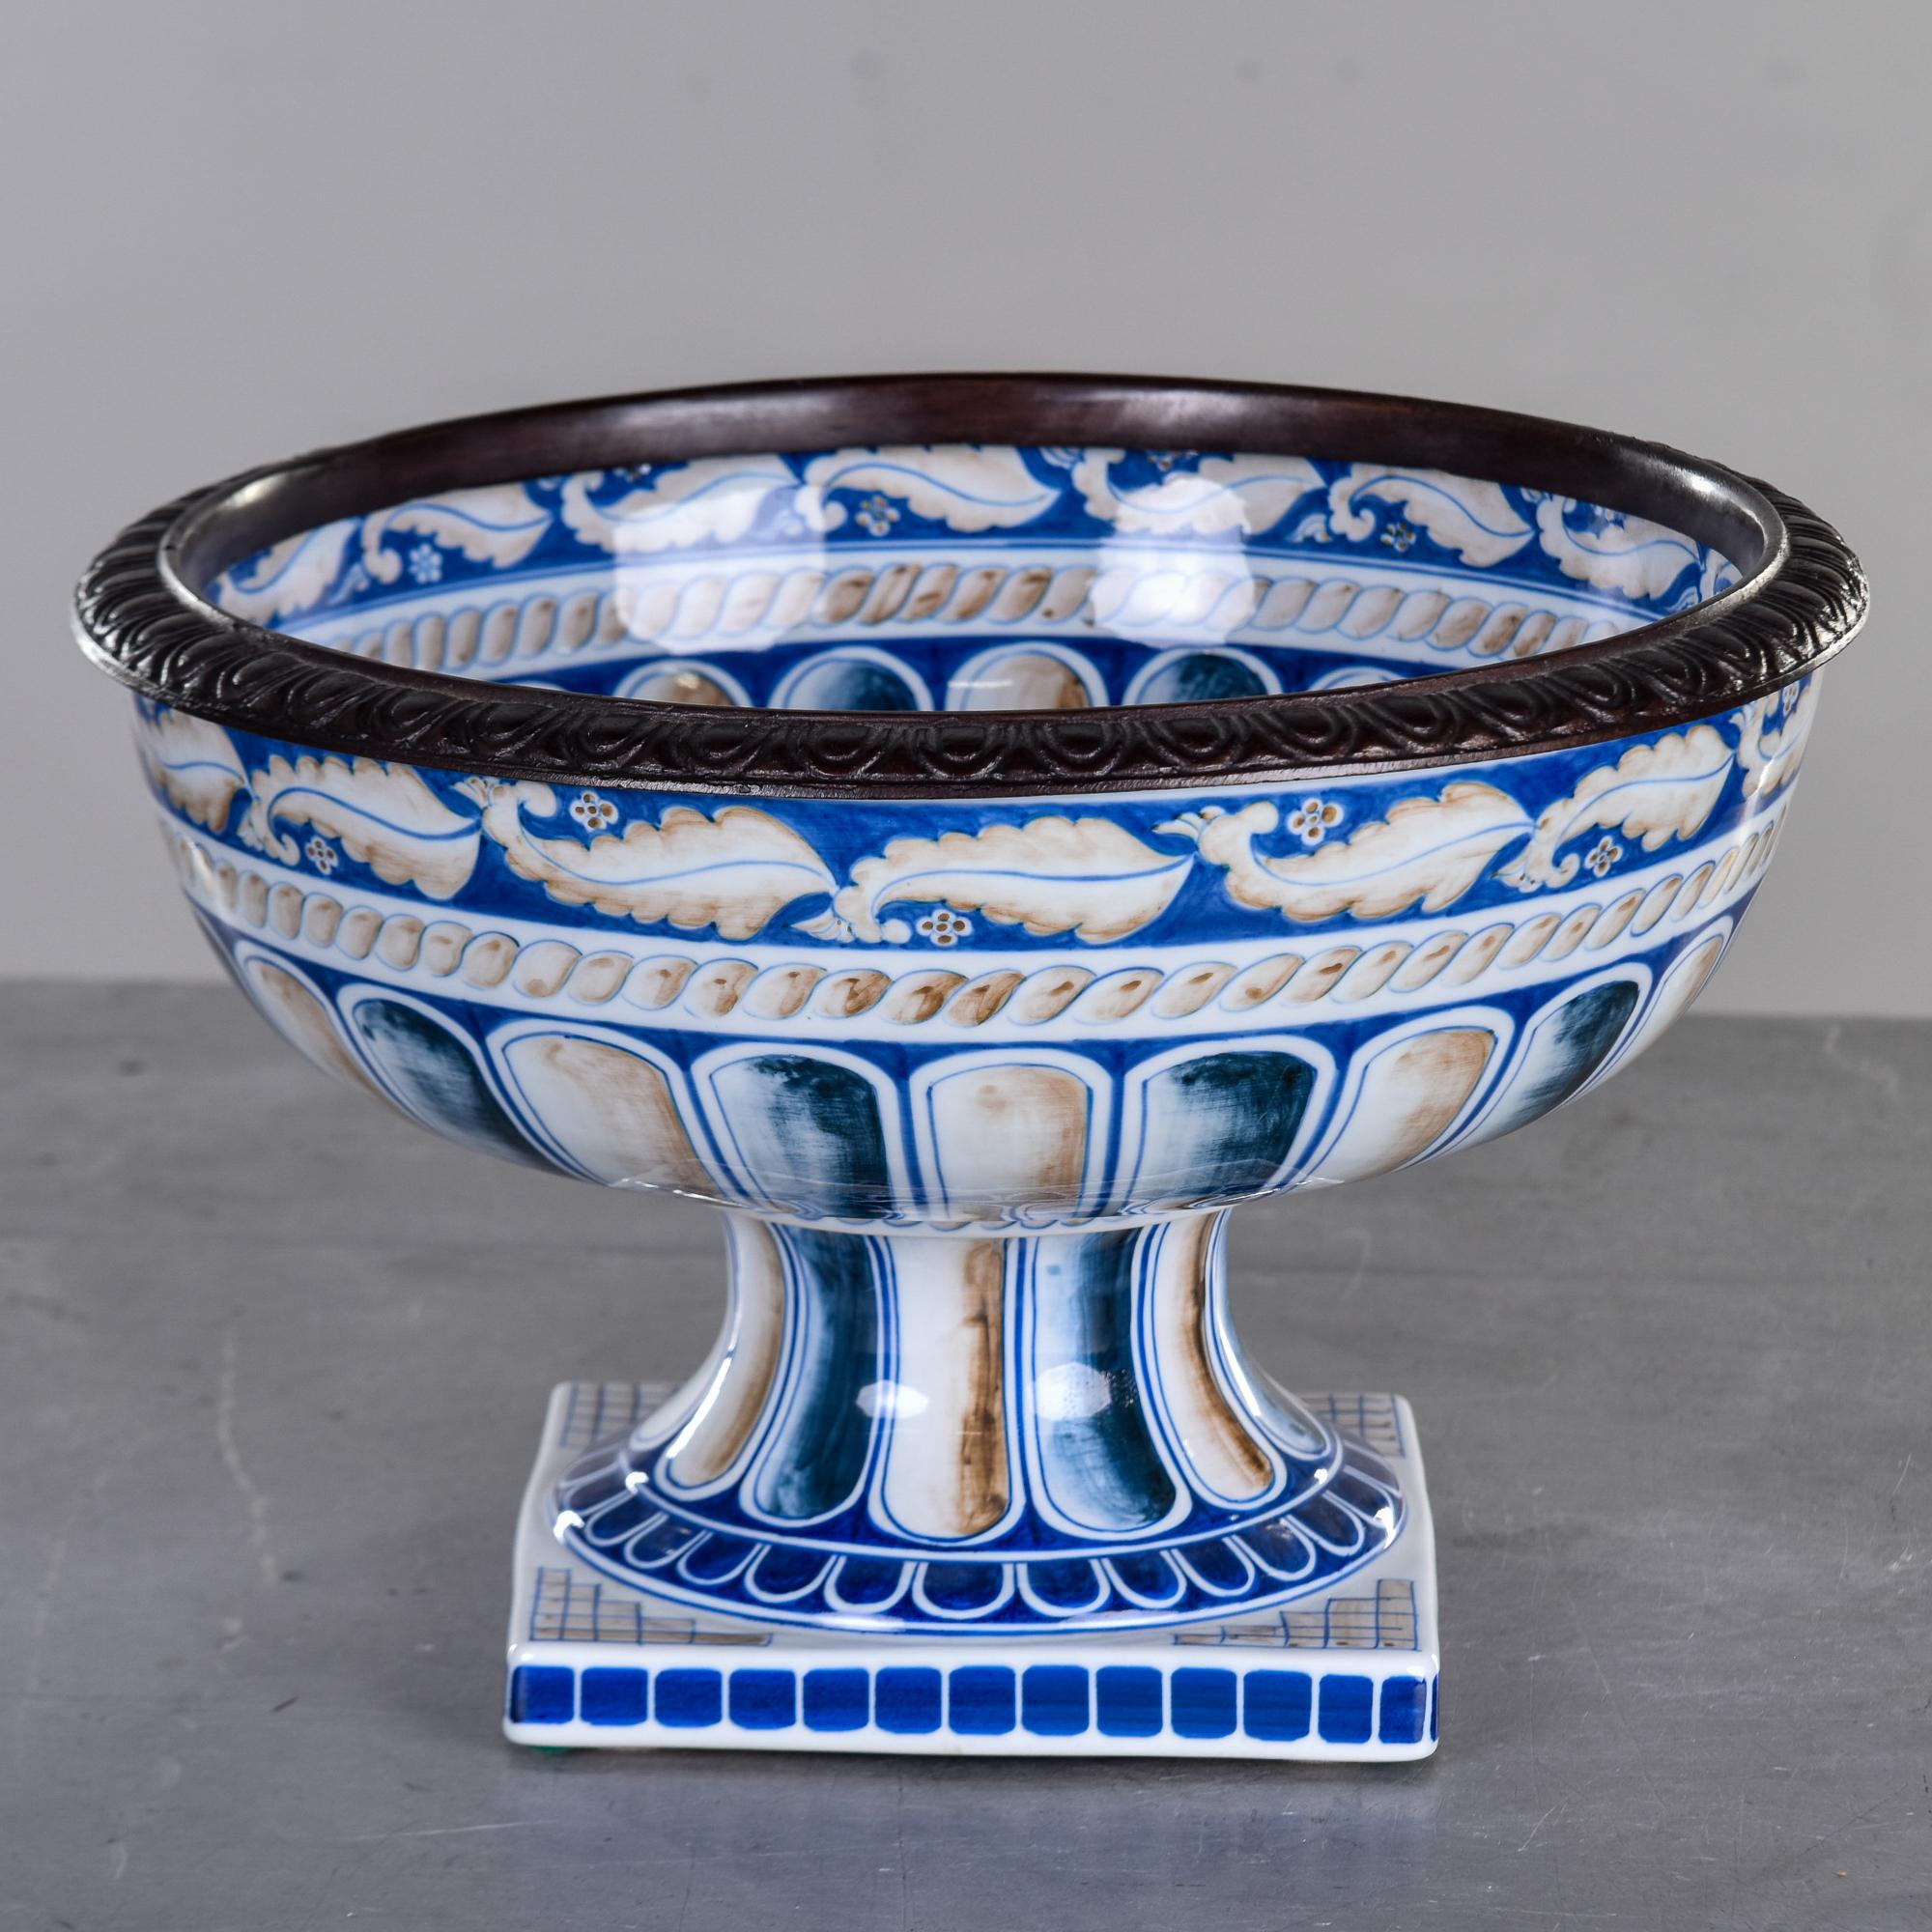 Large circa 1980s pedestal bowl in blue, white and pale brown glaze with leaf and rope braid motif by Maitland Smith. Square pedestal base supports a bowl just under 15” diameter with a decorative bronze rim. No flaws found. Maker’s mark on